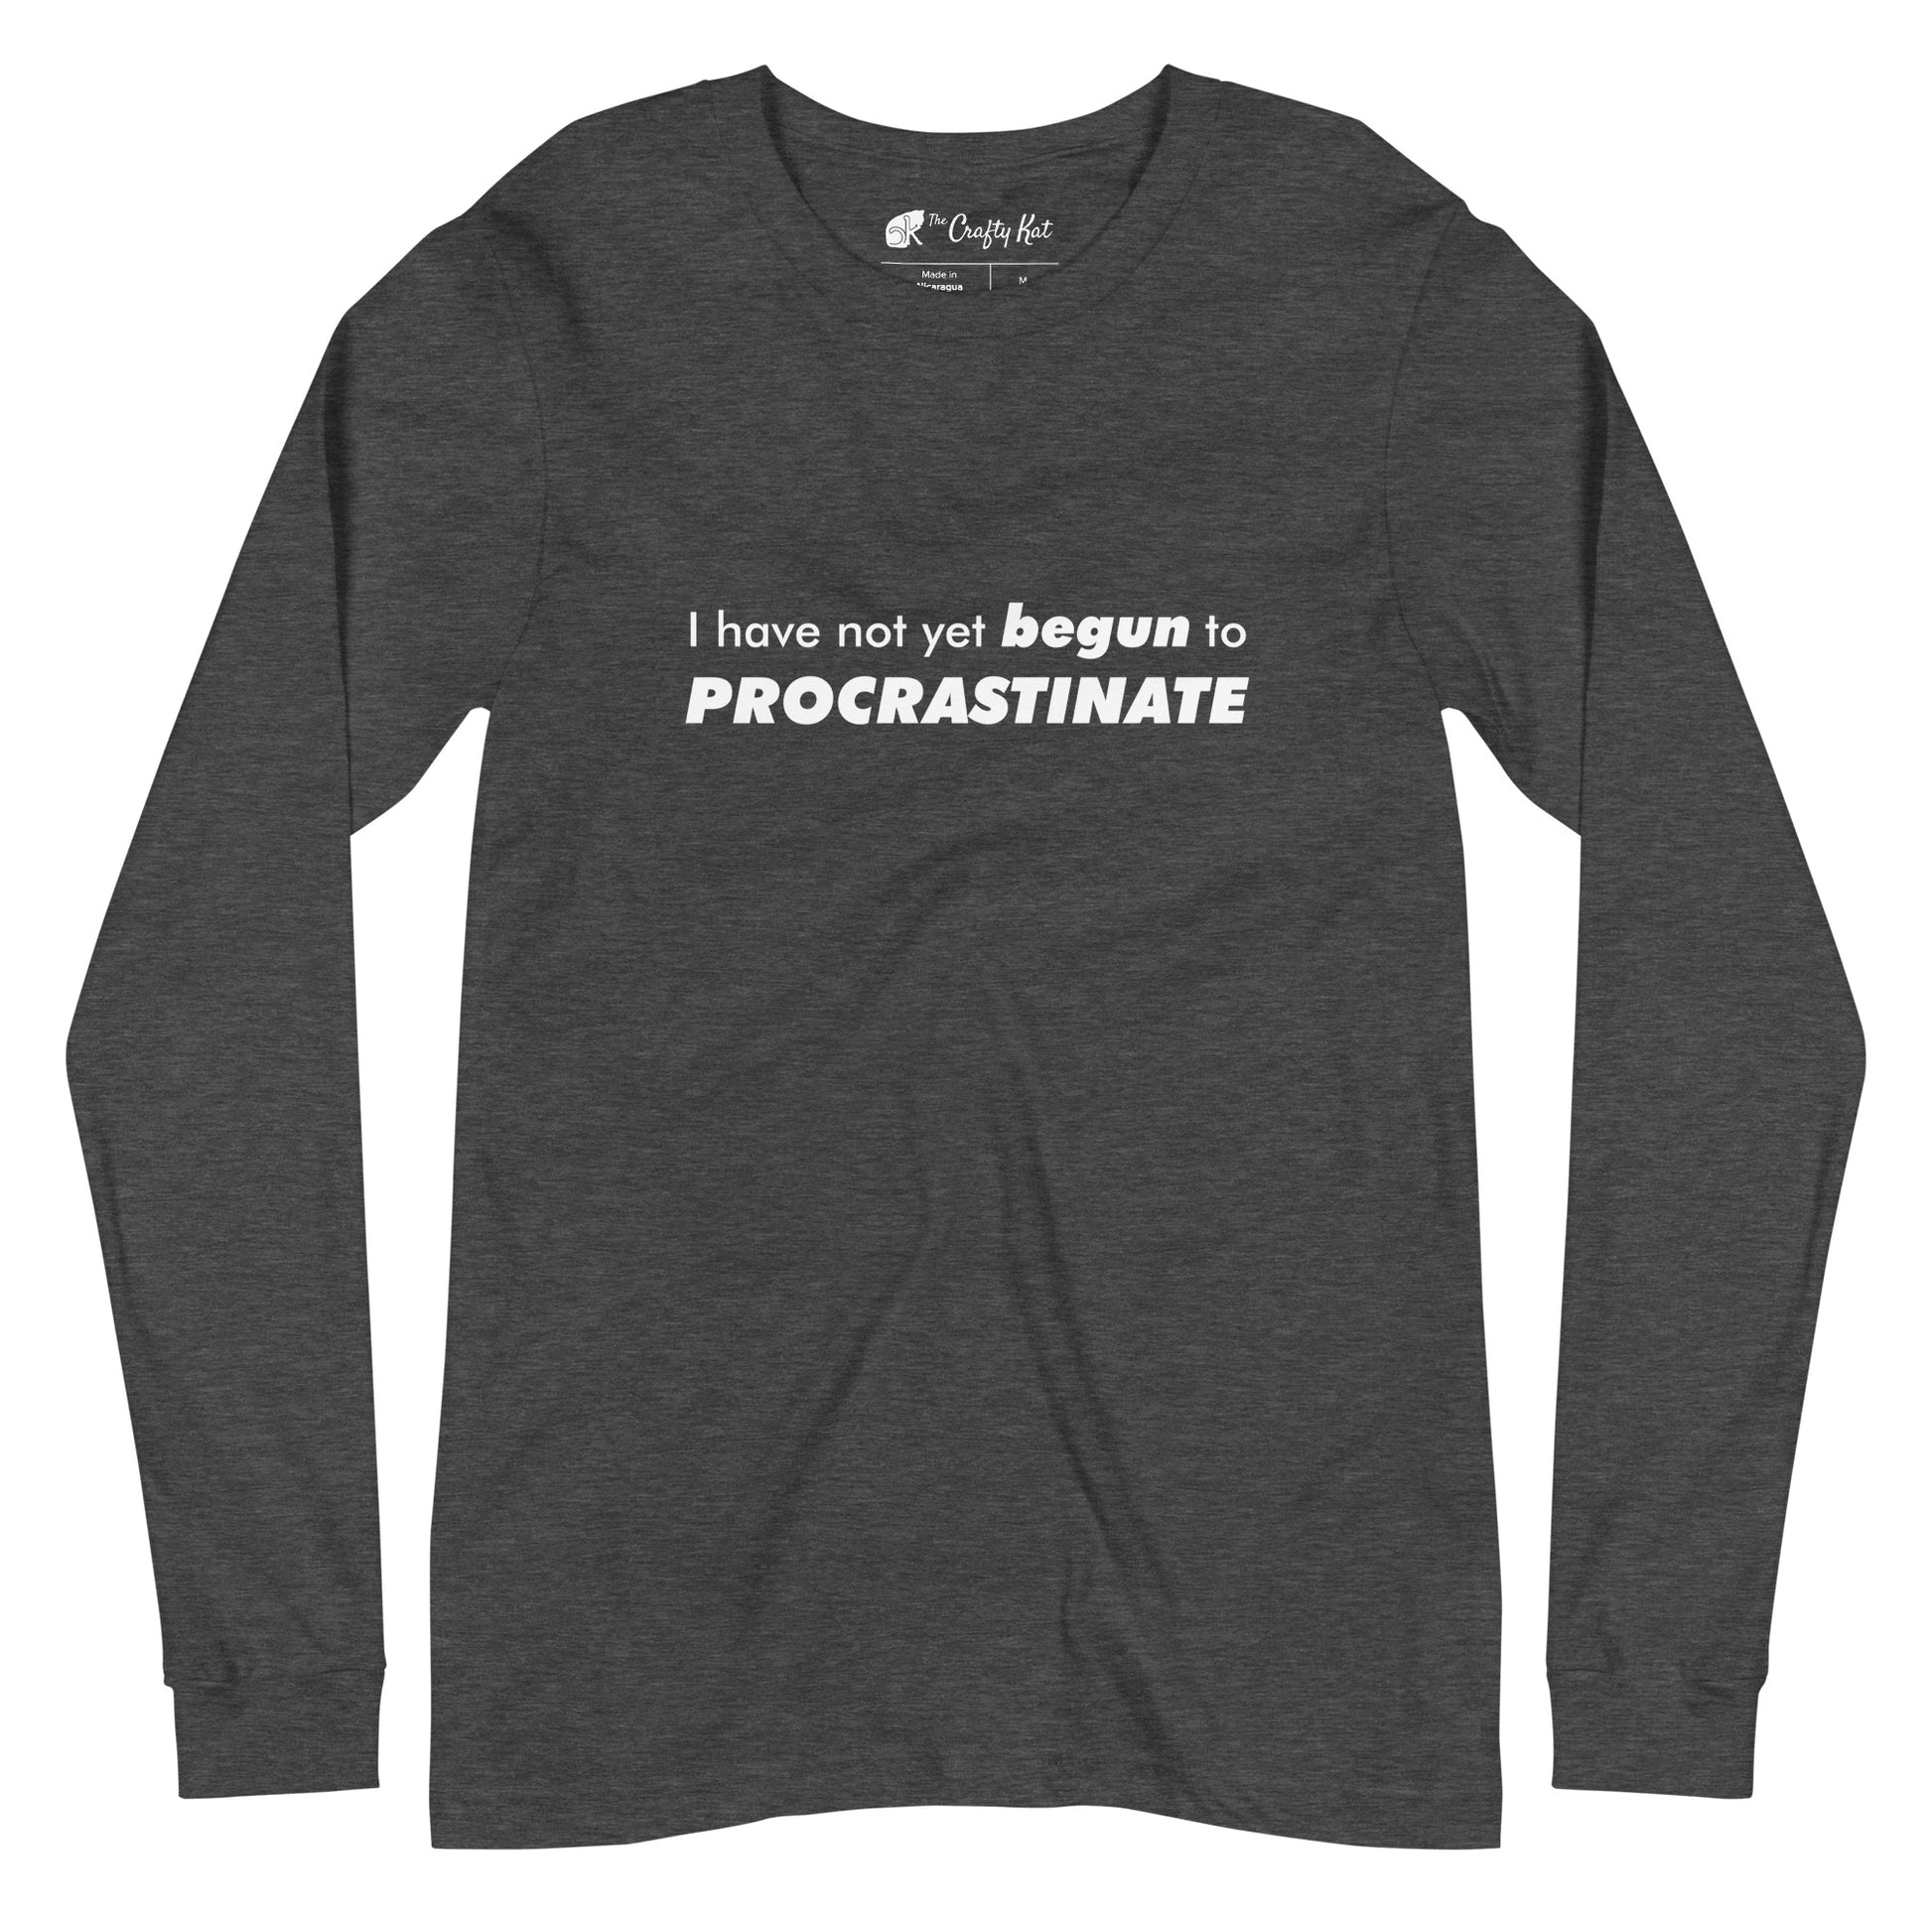 Dark Grey Heather long-sleeve shirt with text graphic: "I have not yet BEGUN to PROCRASTINATE"